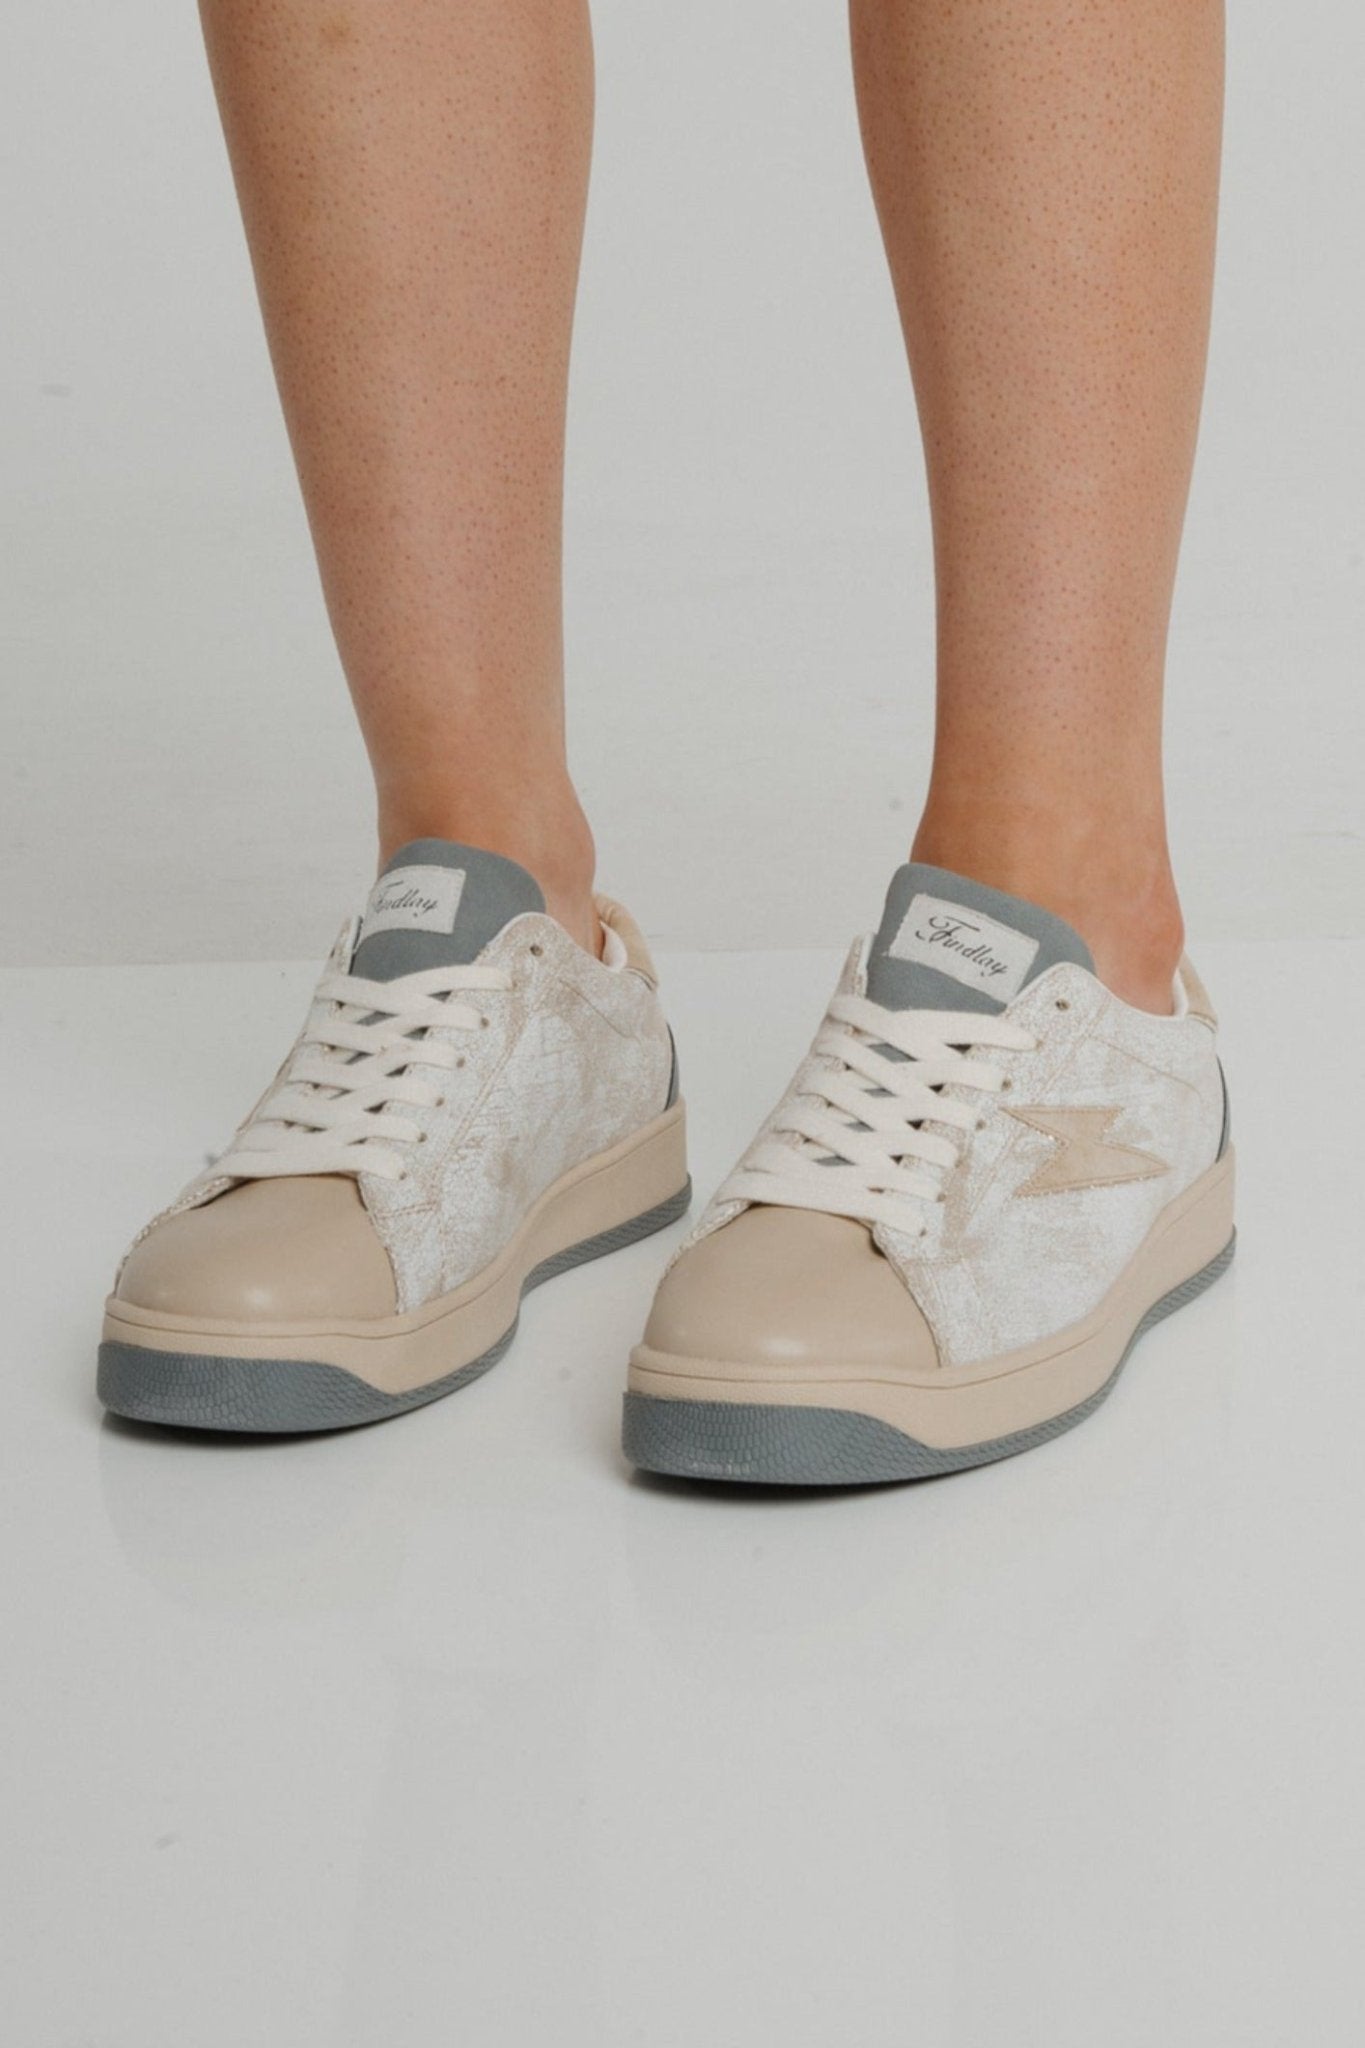 Faith Distressed Trainer In Neutral - The Walk in Wardrobe